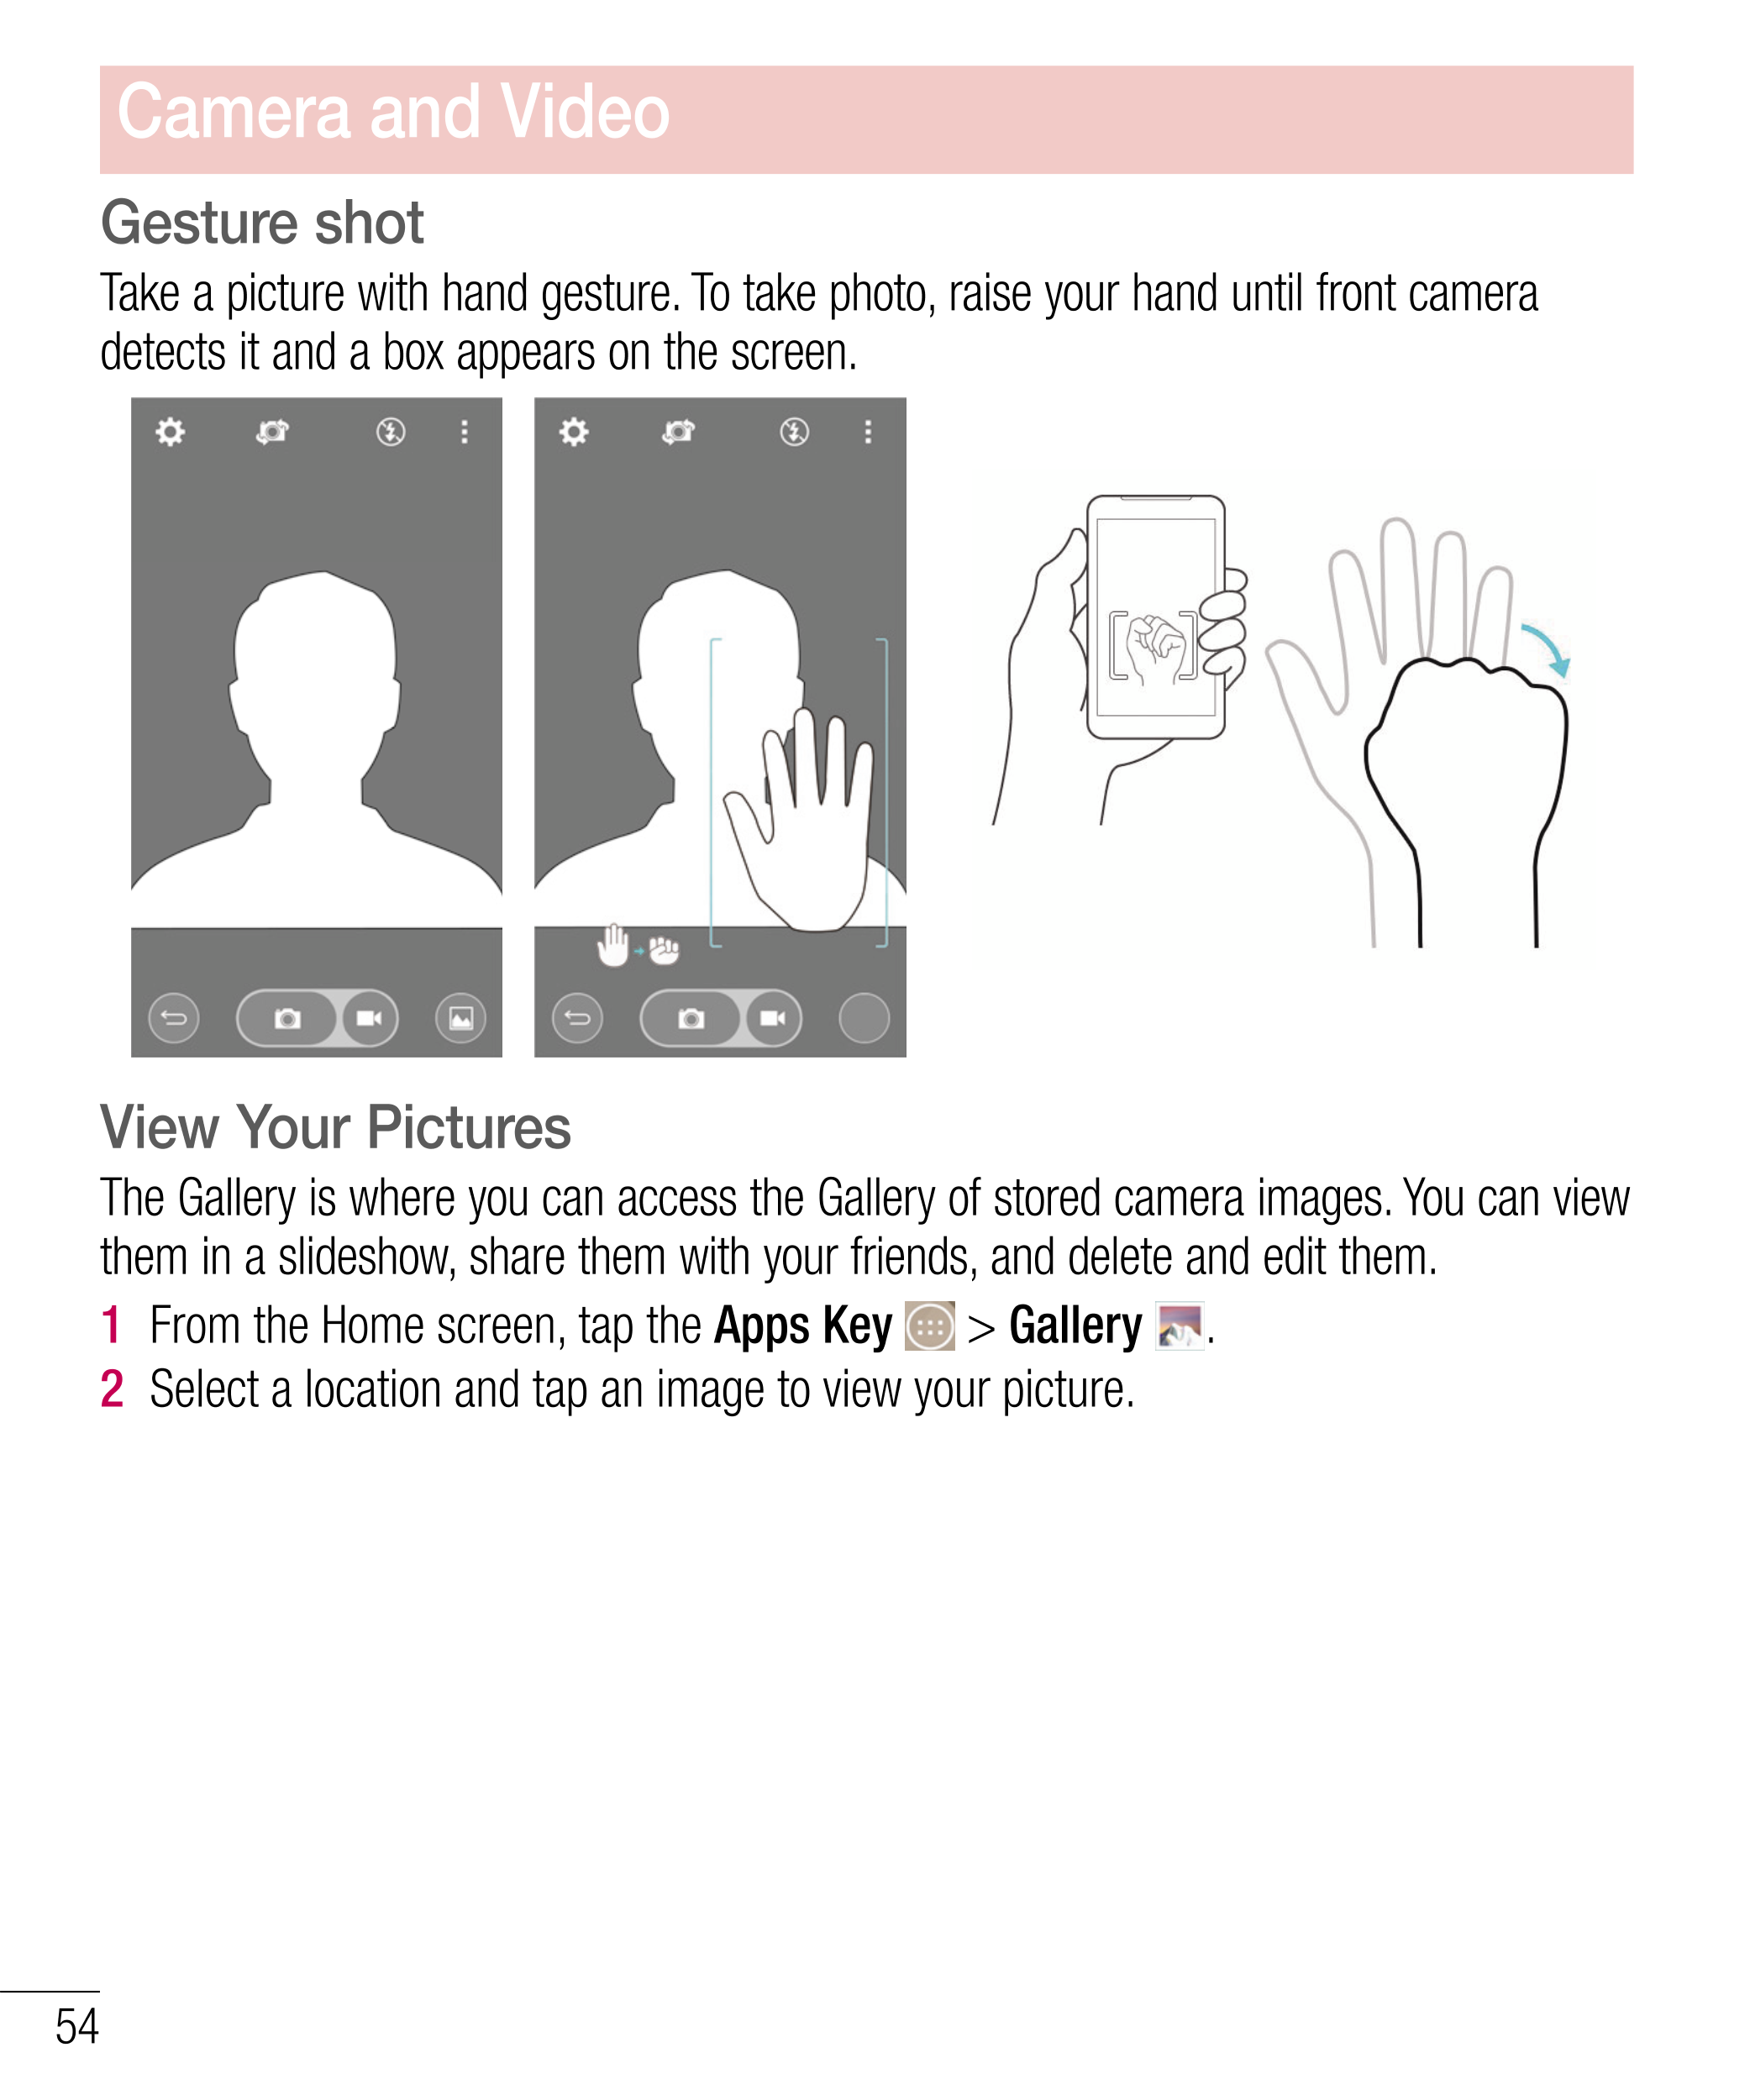 Camera and Video
Gesture shot
Take a picture with hand gesture. To take photo, raise your hand until front camera 
detects it an